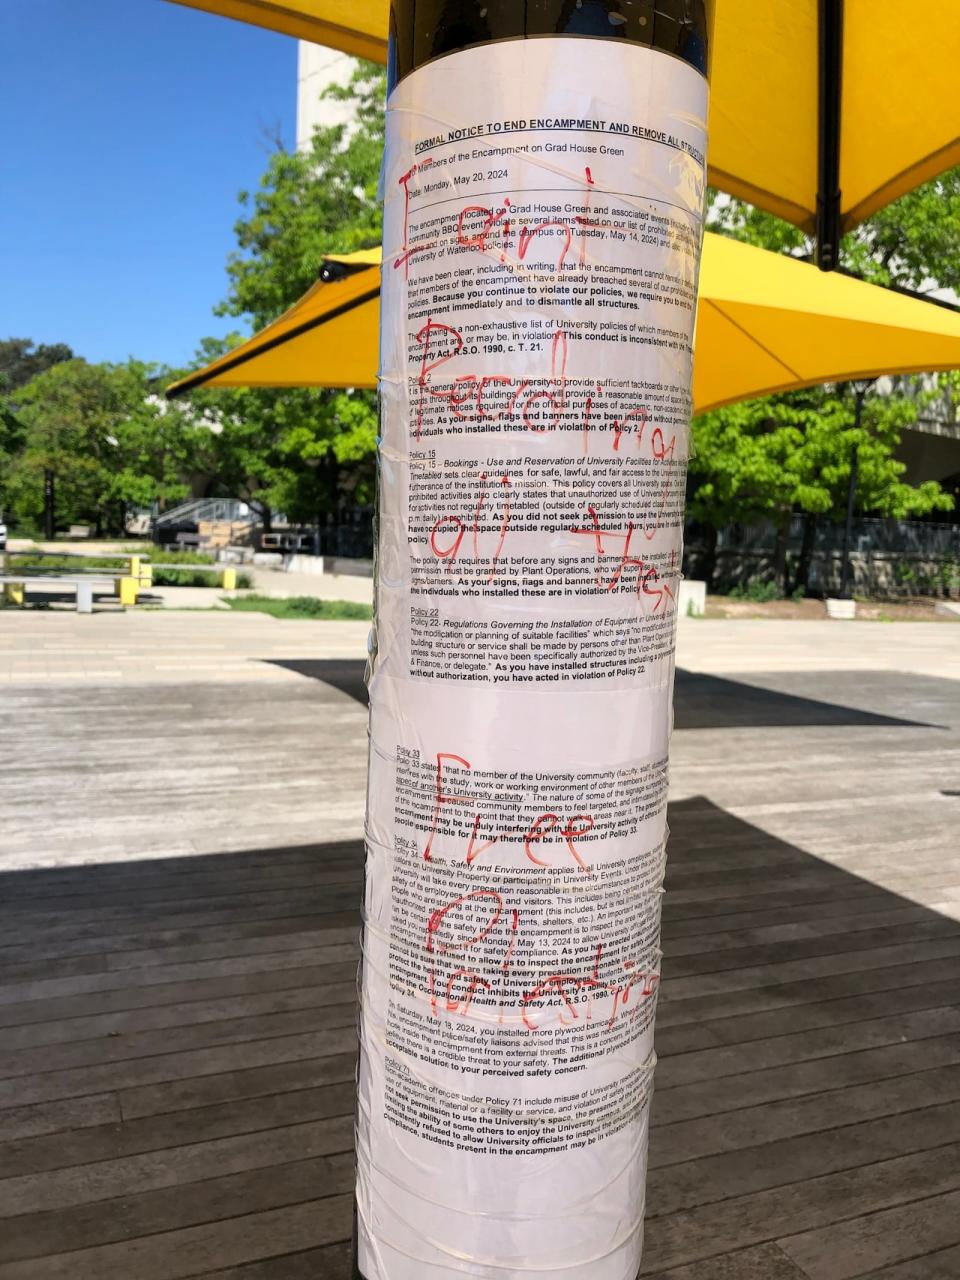 The university has put up its formal notice to end the encampment on lights posts and umbrella stands near the area around where the encampment has been set up.